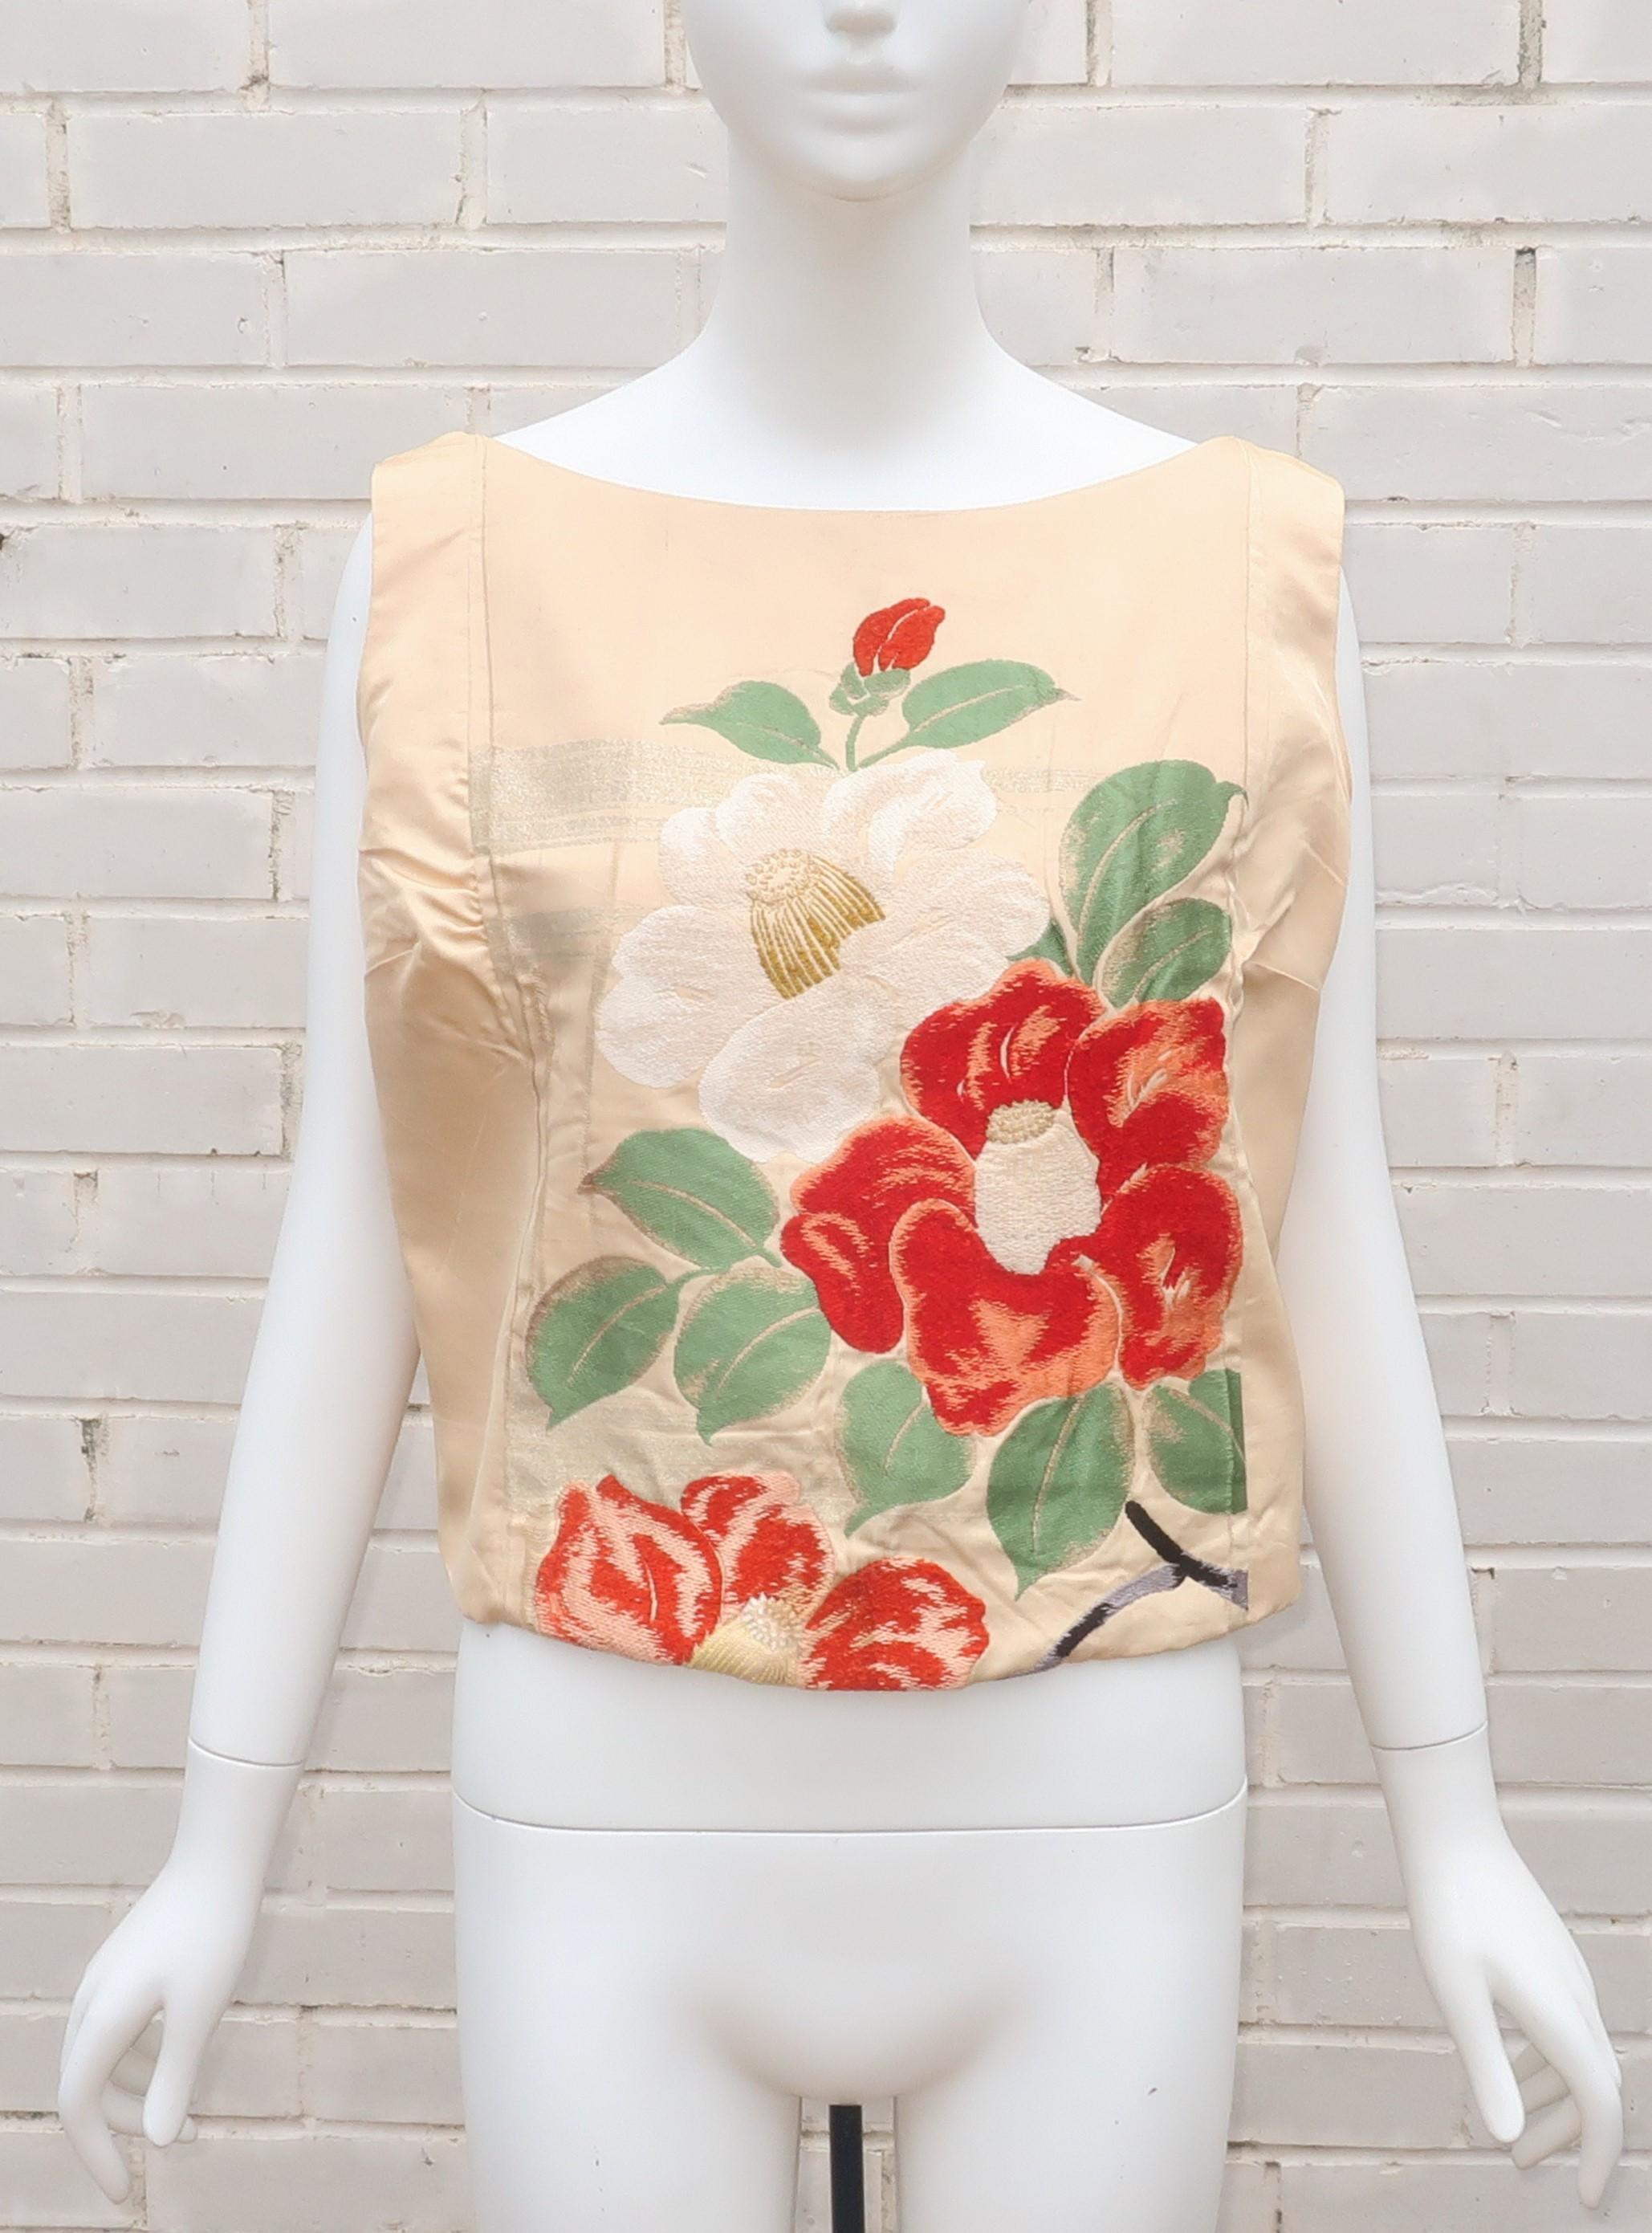 C.1950 sleeveless creme shell style top custom fabricated from a Japanese obi cloth.  The rich creme background is the perfect frame for the vibrant coral red, antique white and green flower design which has a chenille texture all accented by silver